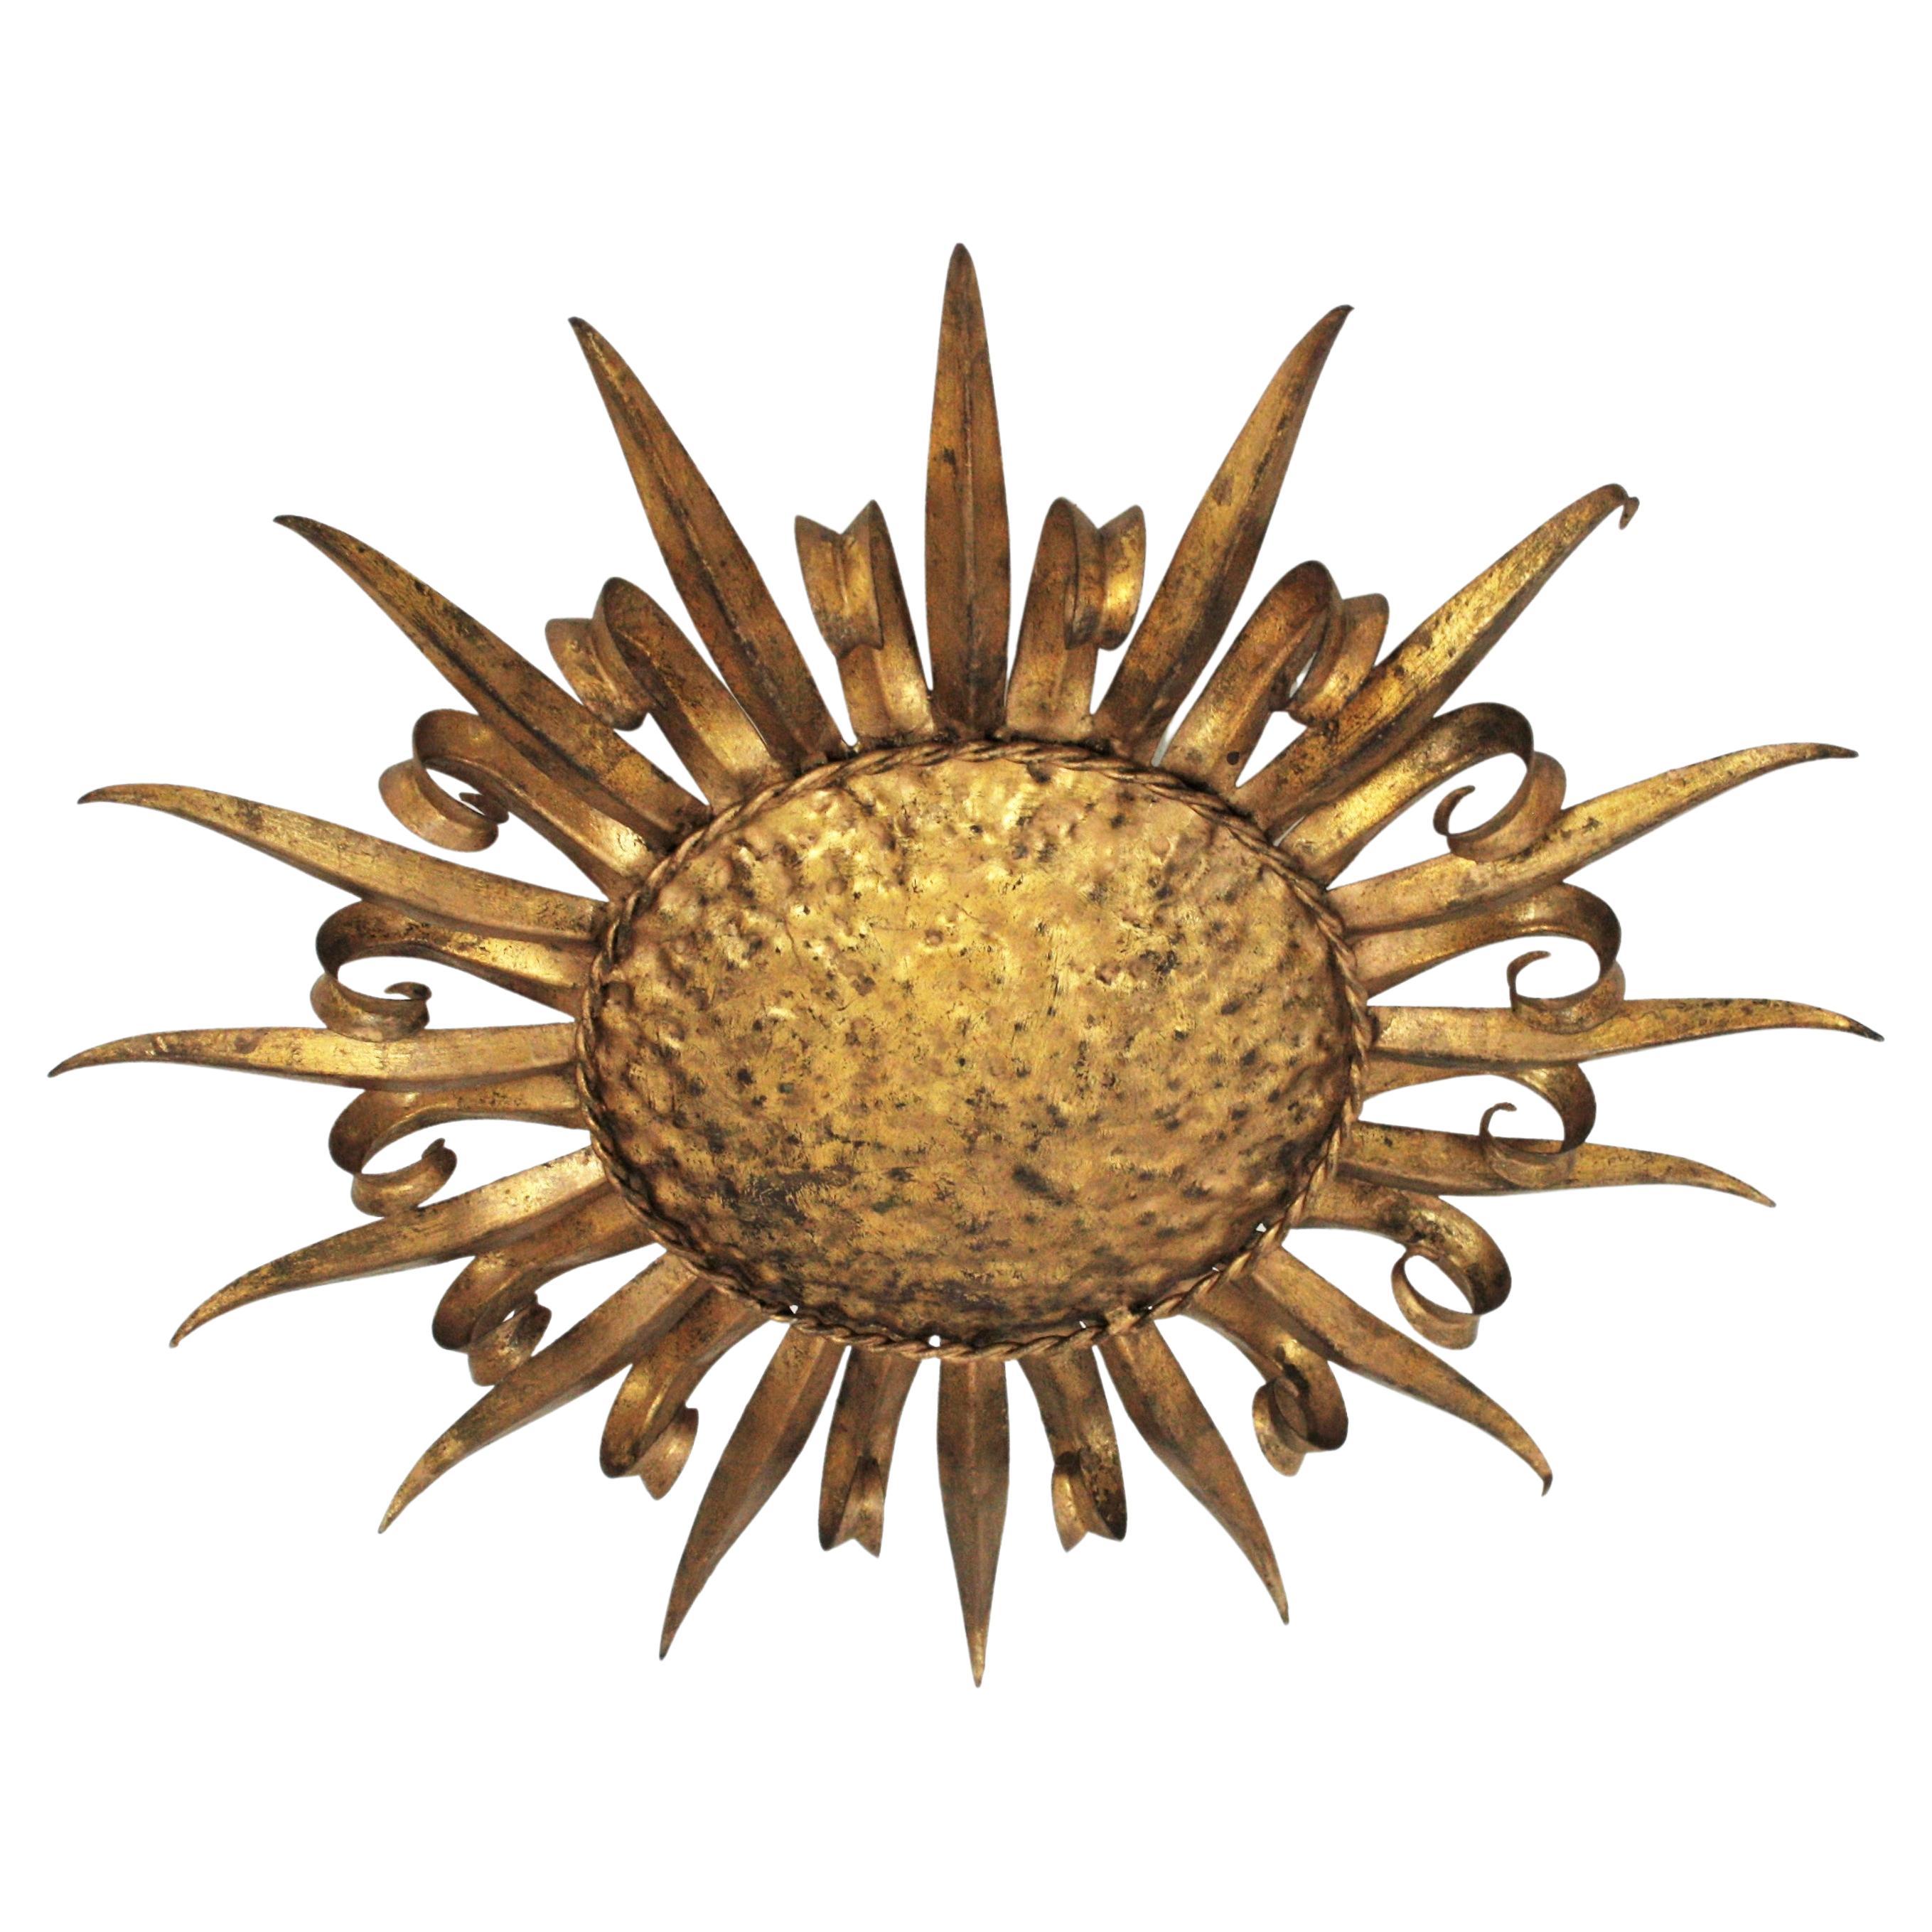 French midcentury gilt iron eyelash sunburst ceiling light fixture / wall sconce, 1950s.
A hand-hammered large gilt iron sunburst light fixture with alternating eyelash ended rays and straight rays. Handcrafted in France at the mid-20th century